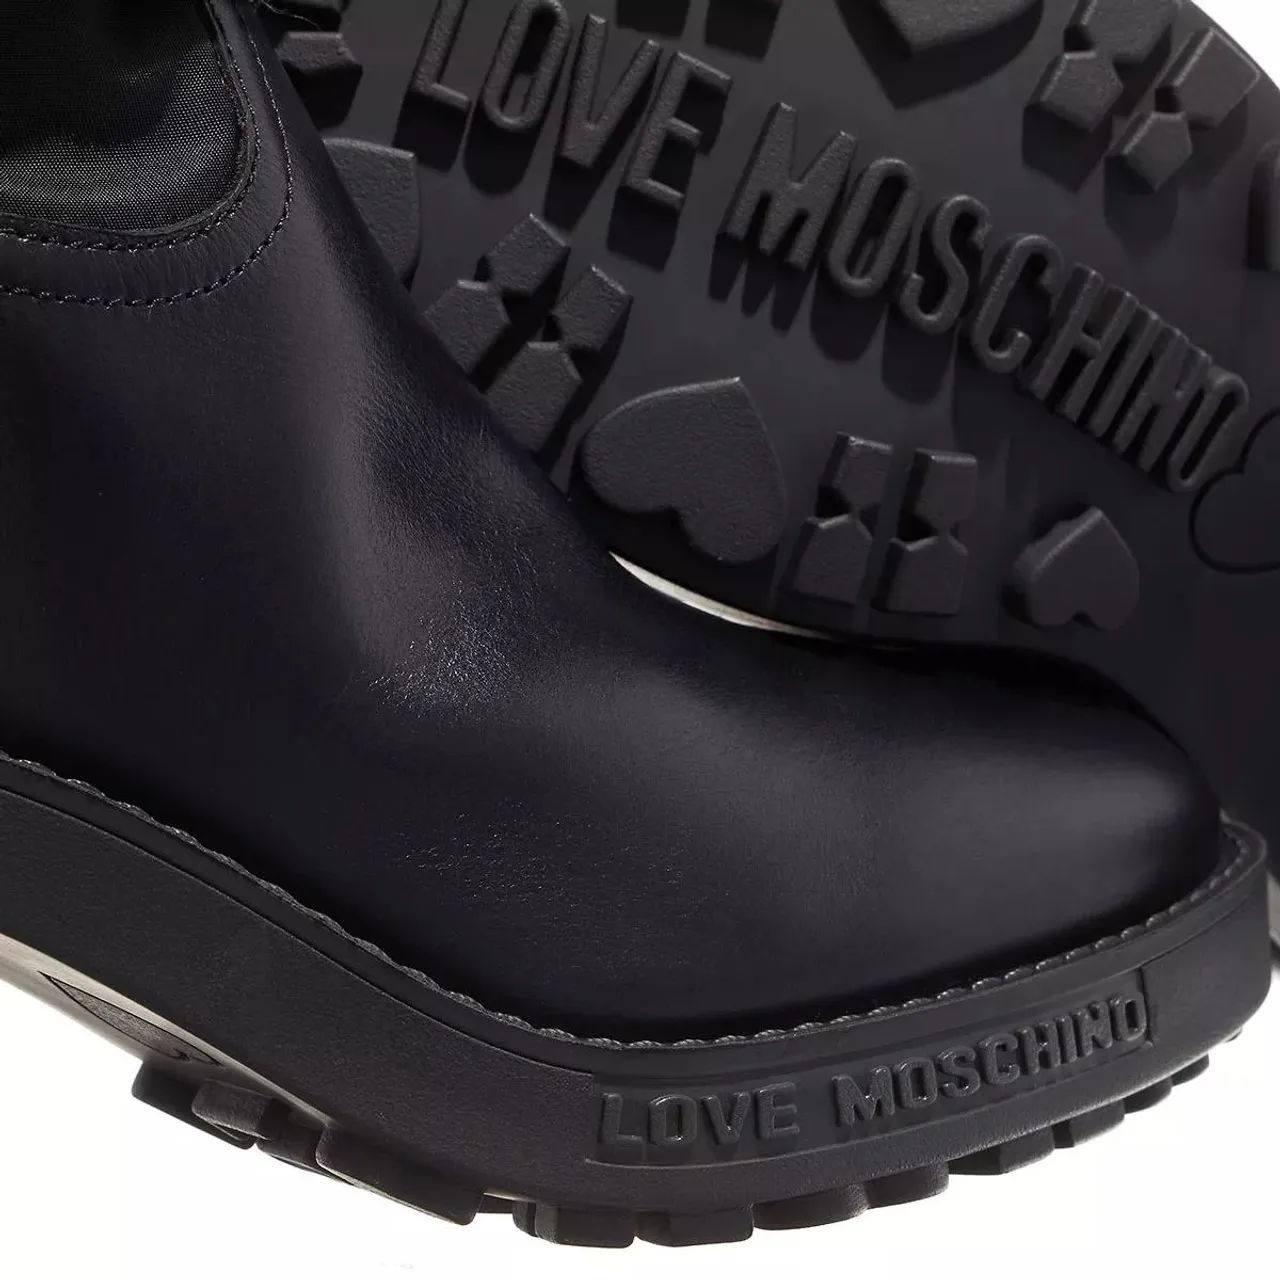 Love Moschino Boots & Ankle Boots - Stivaled.Quad70 Vitello+Nylon - black - Boots & Ankle Boots for ladies